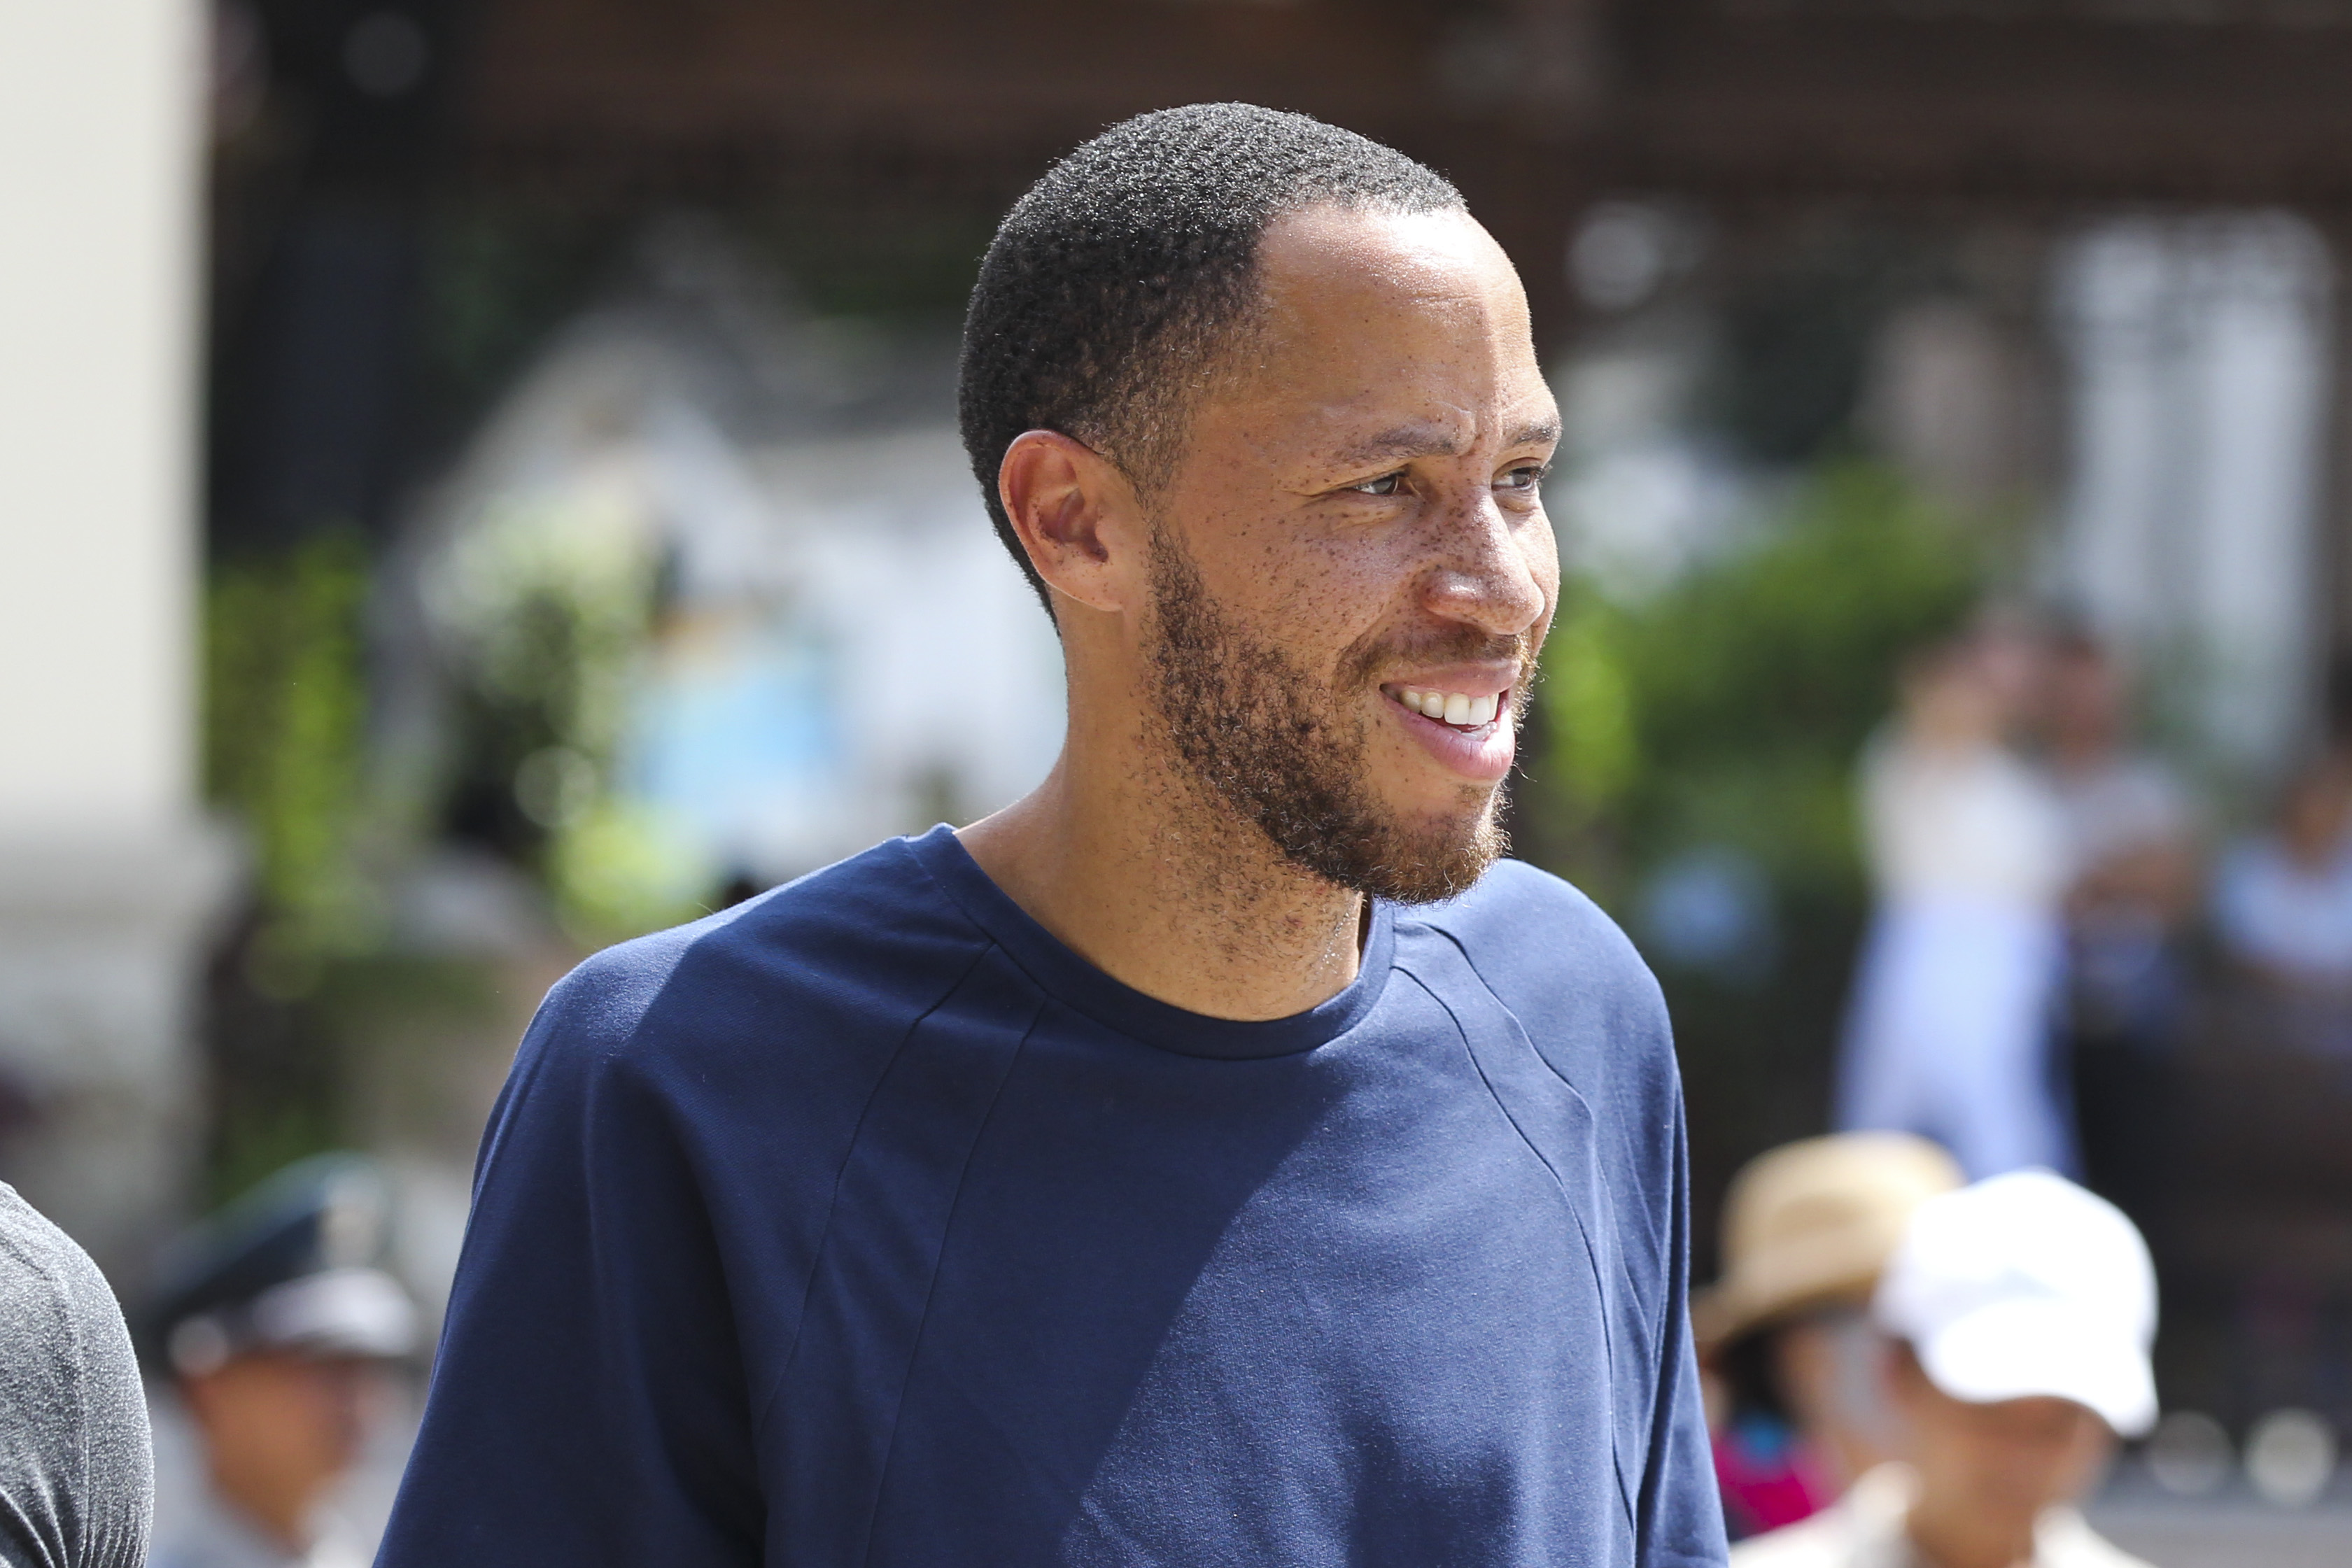 Tayshaun Prince promoted to Grizzlies' Vice President of